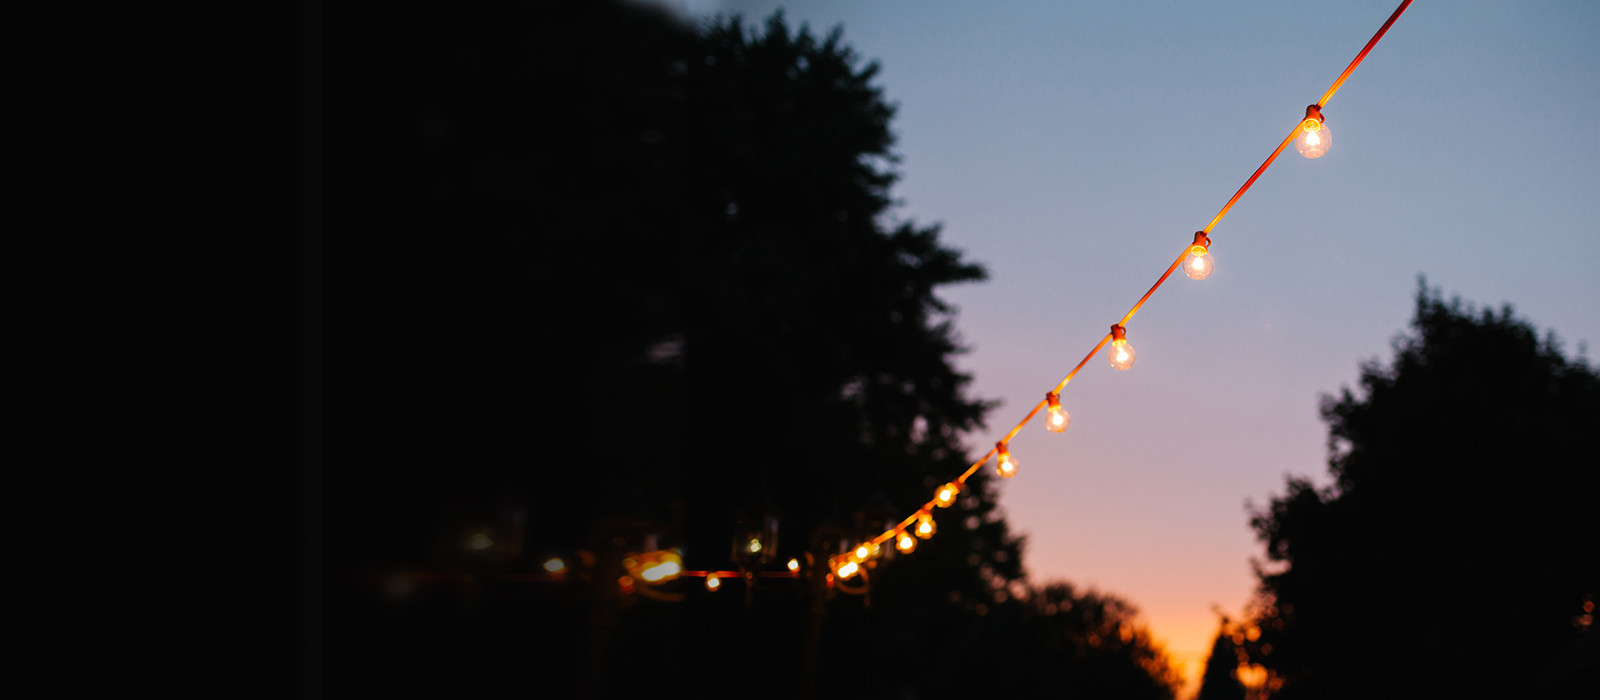 A chain of decorative lighting in an open garden